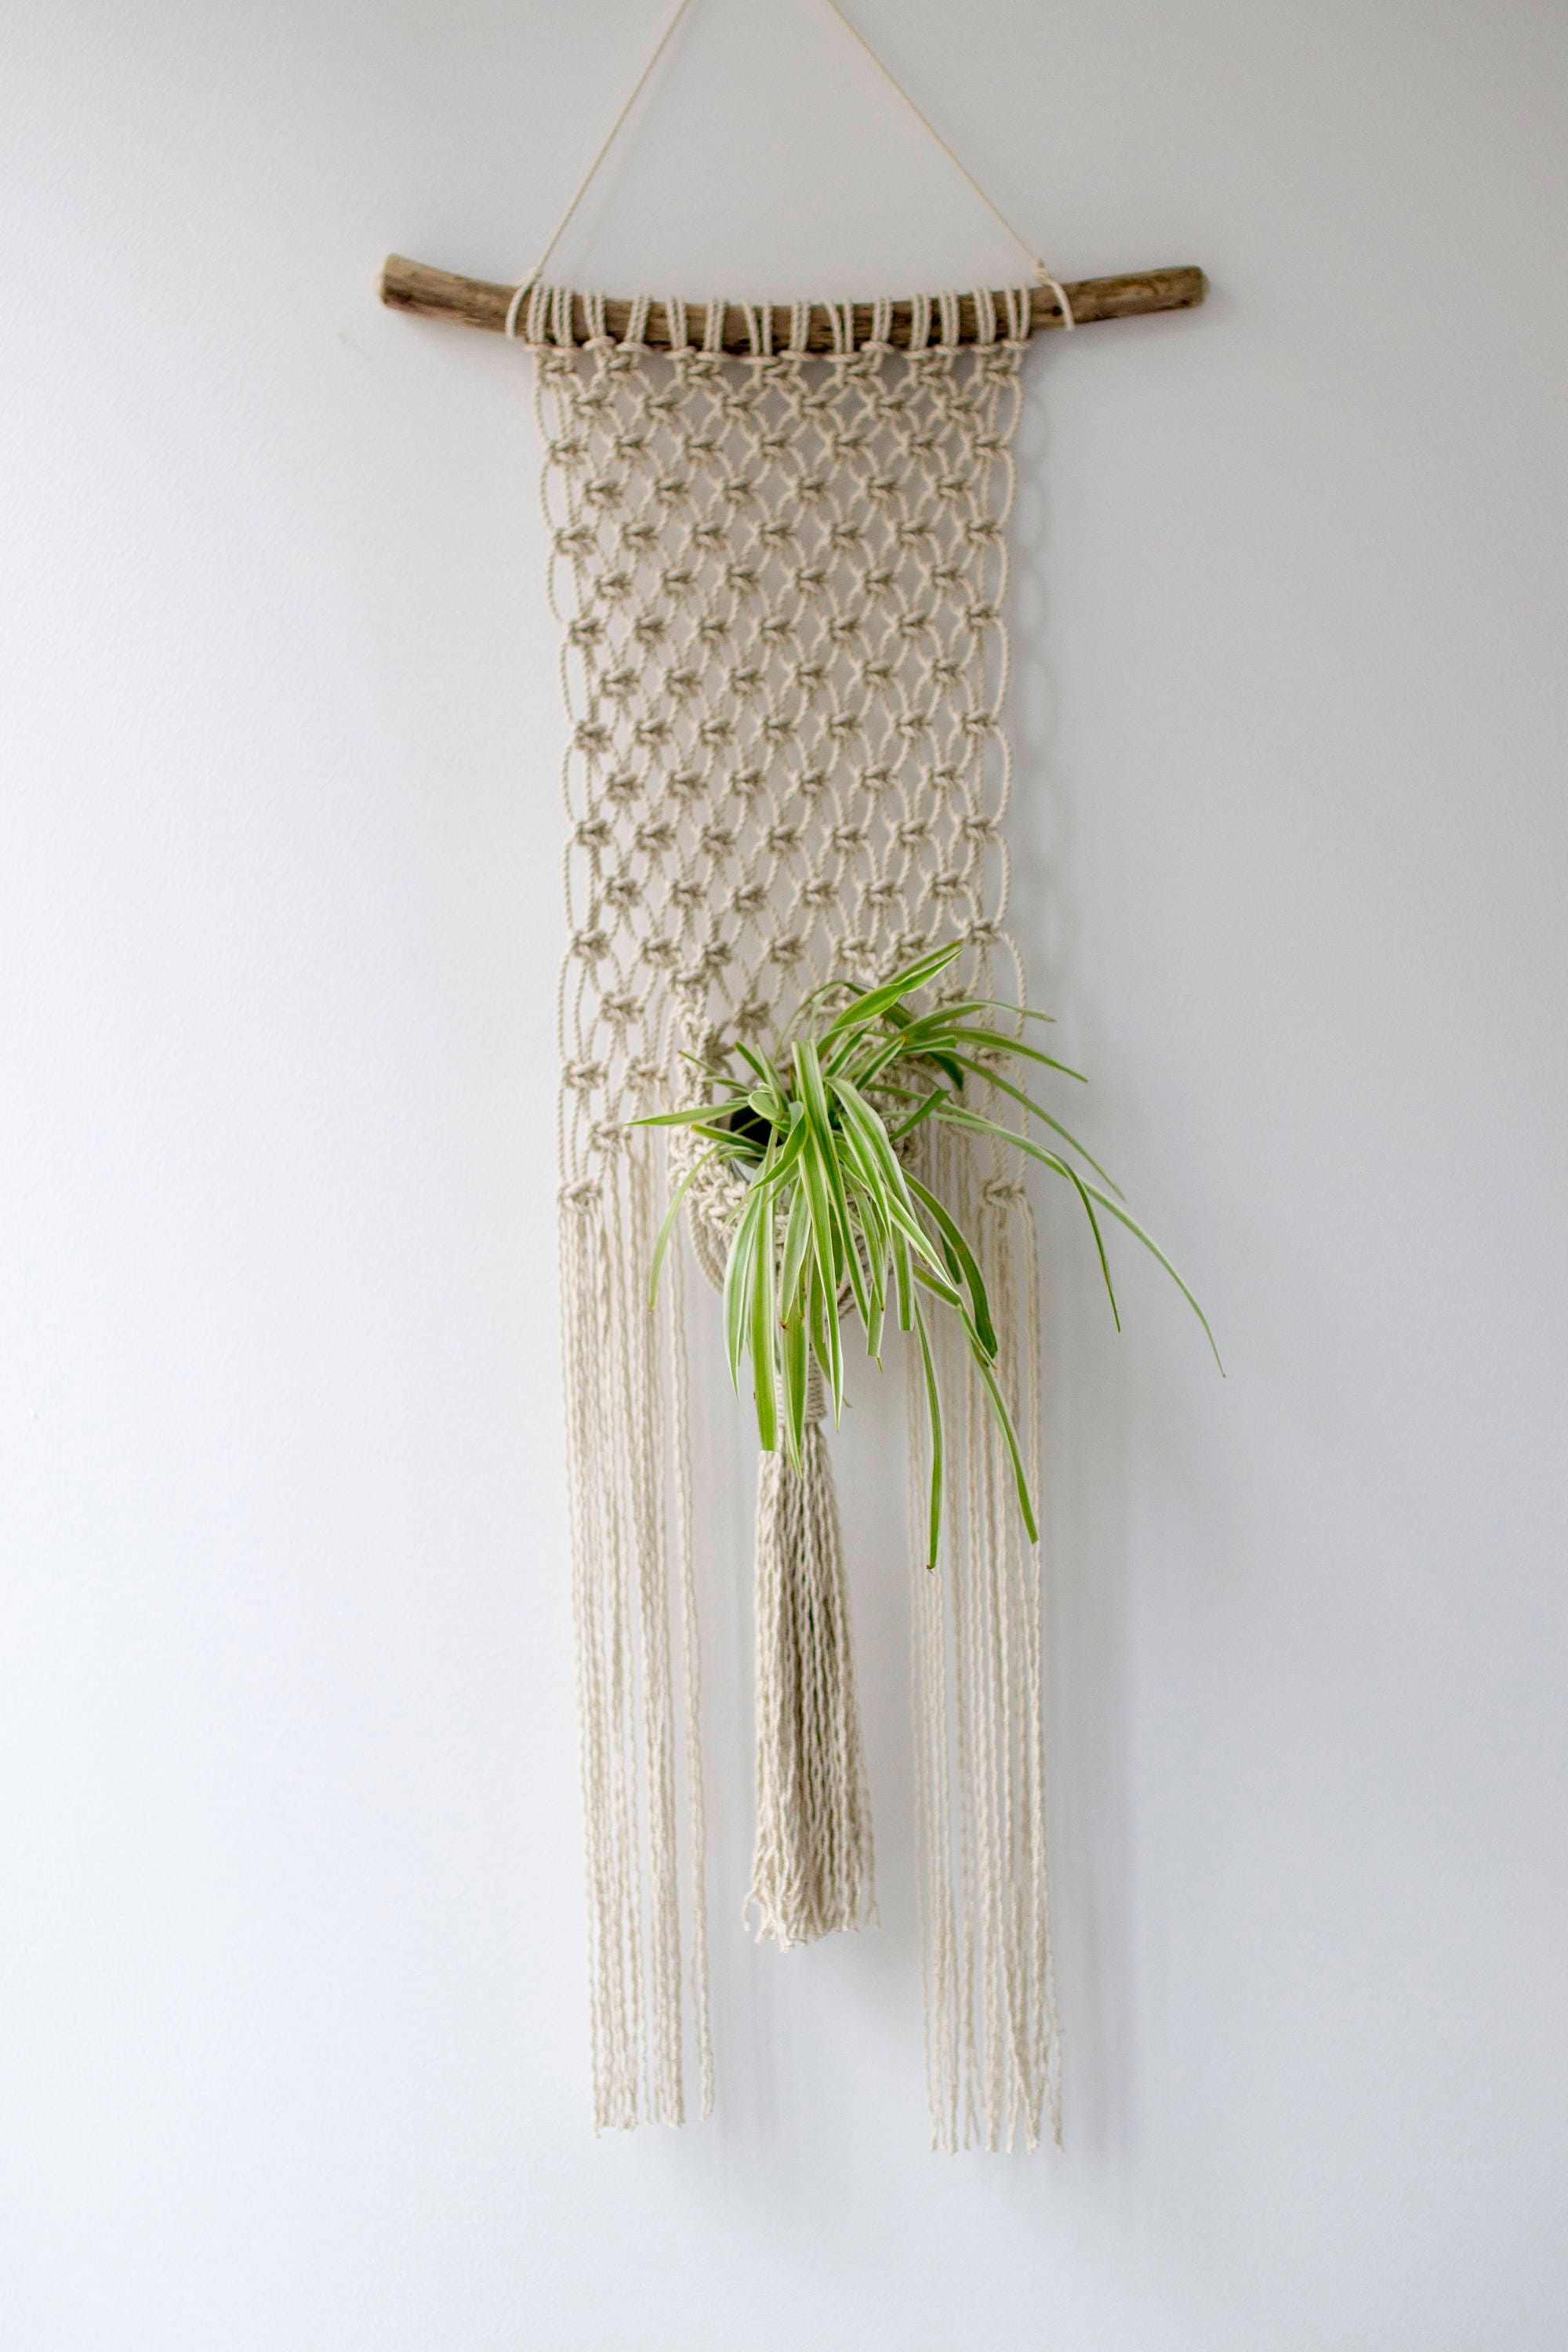 Large Macrame Wall Hanging Available in White, Gray, Mustard, Green, Mint,  Salmon, Blush or Lavender 46 X 40 116cm X 100cm 